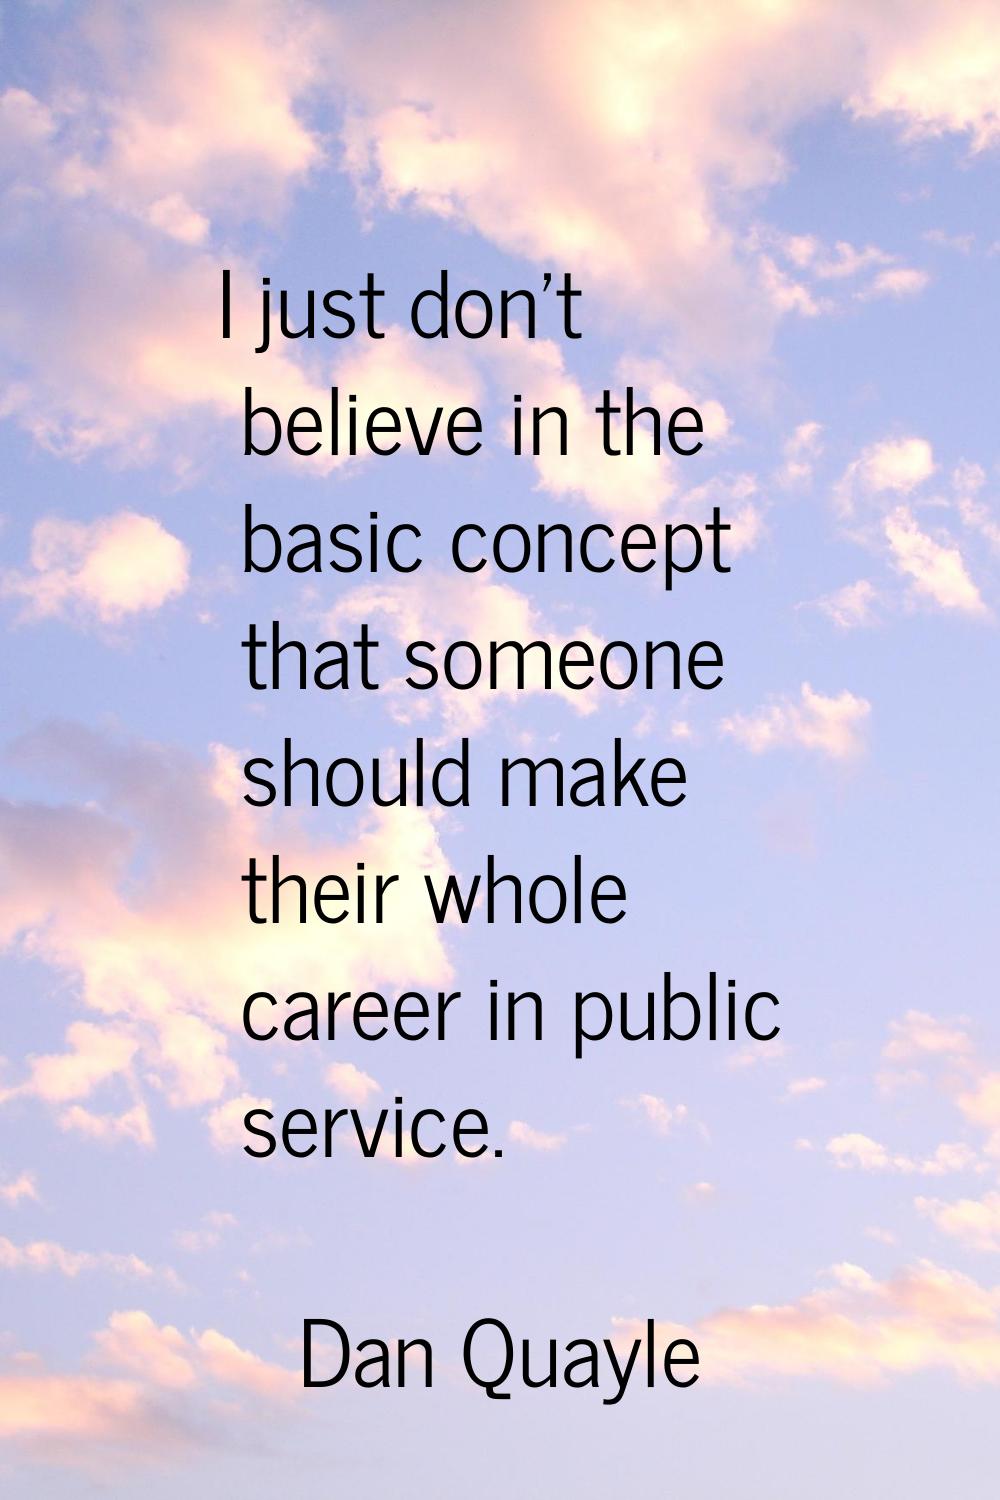 I just don't believe in the basic concept that someone should make their whole career in public ser